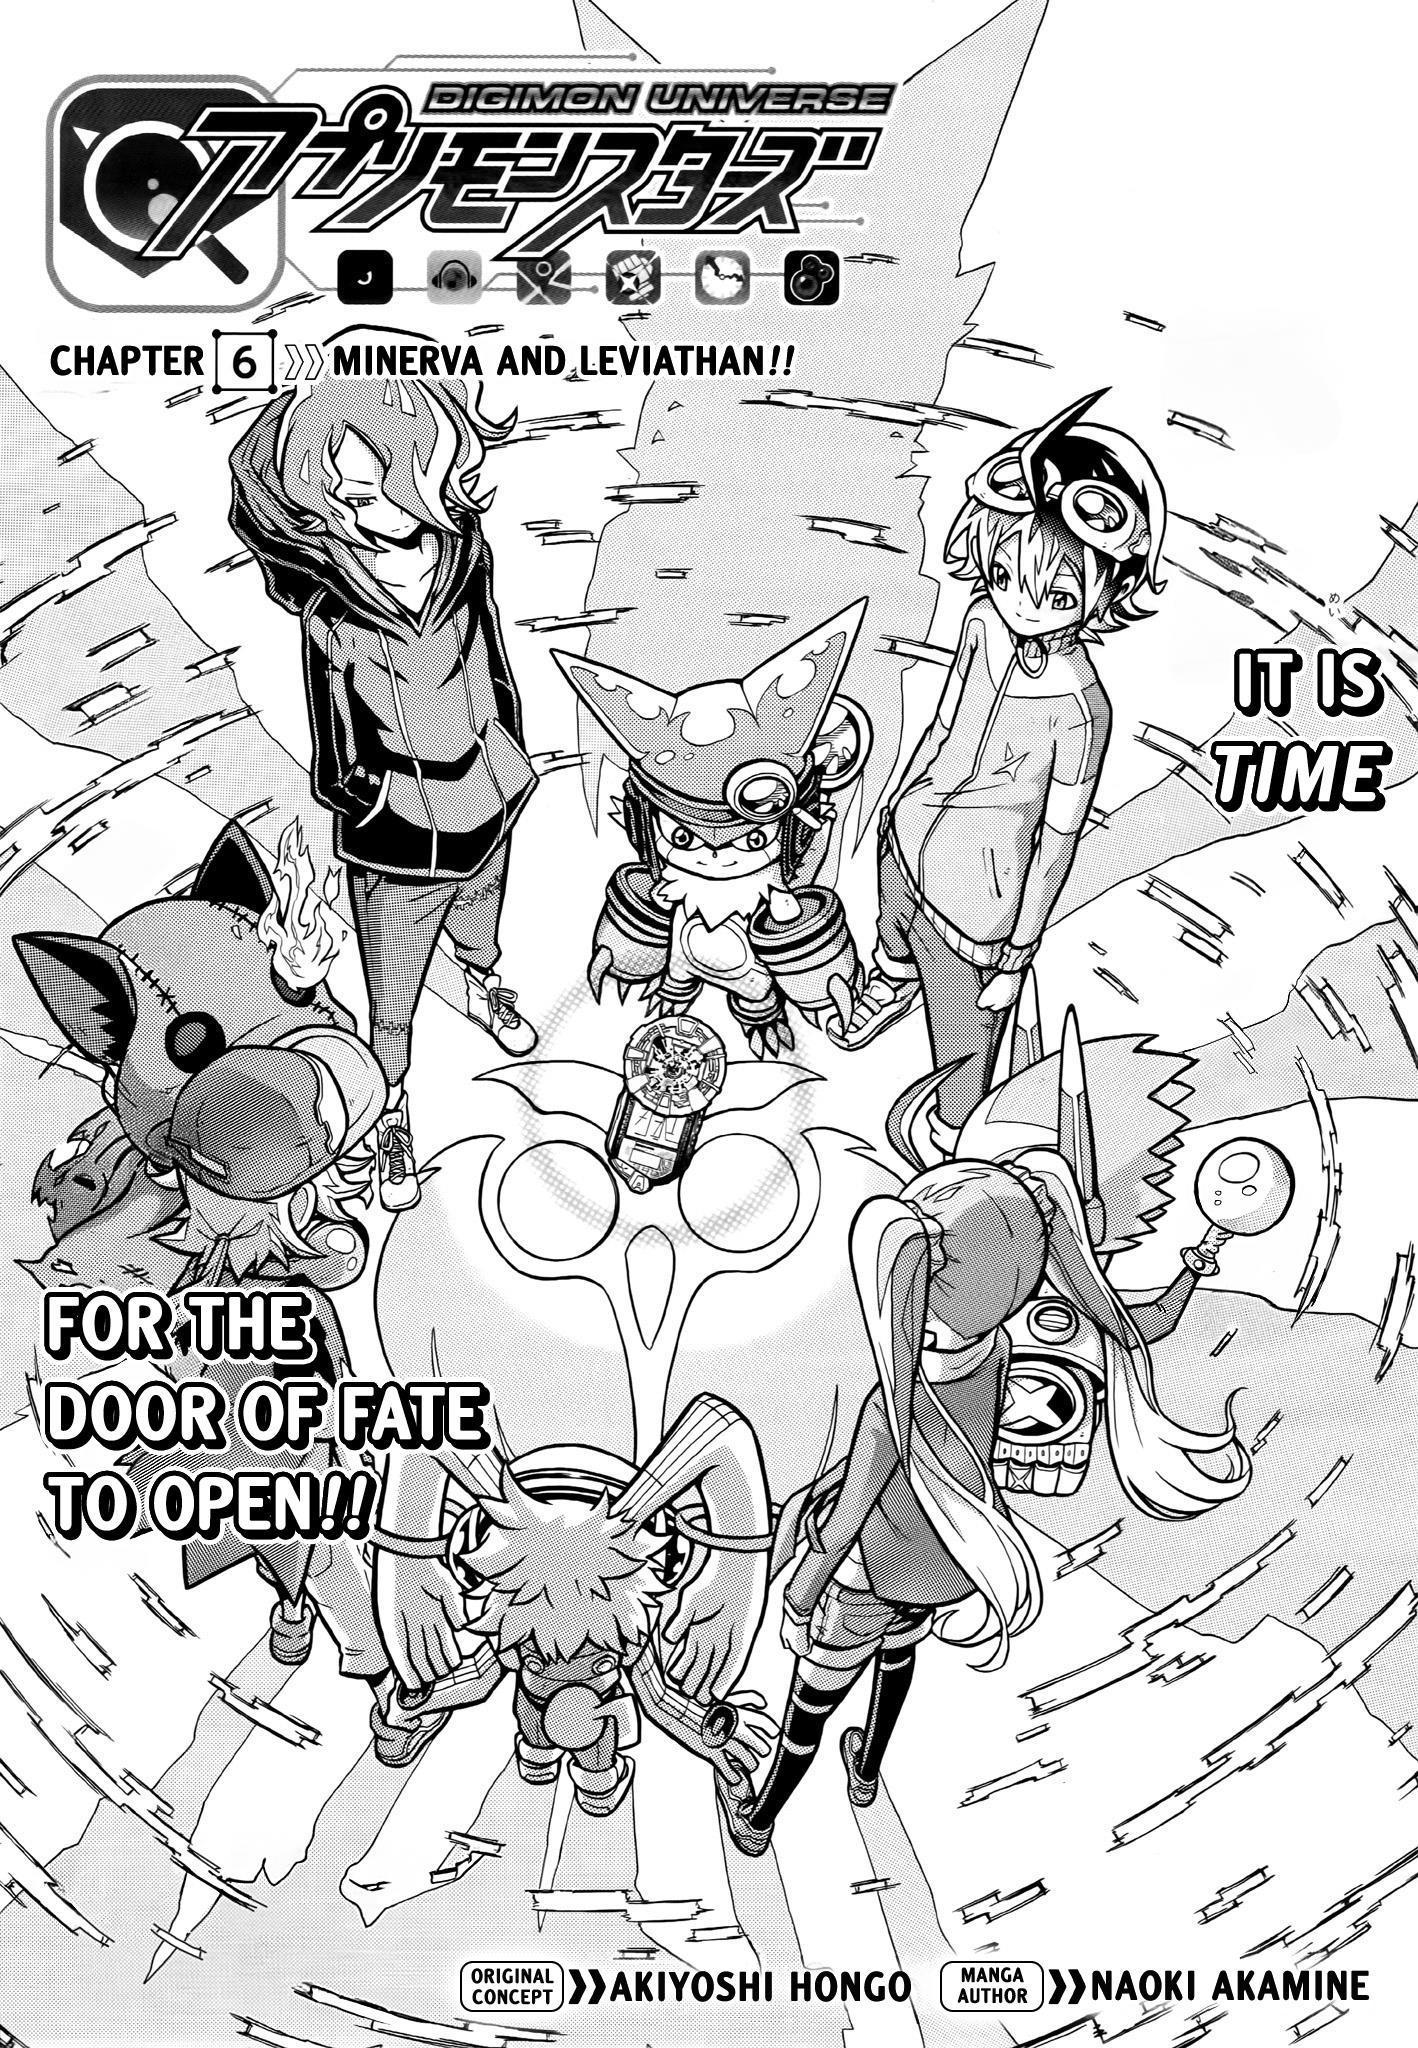 Digimon Universe: Appli Monsters Chapter 6 #3